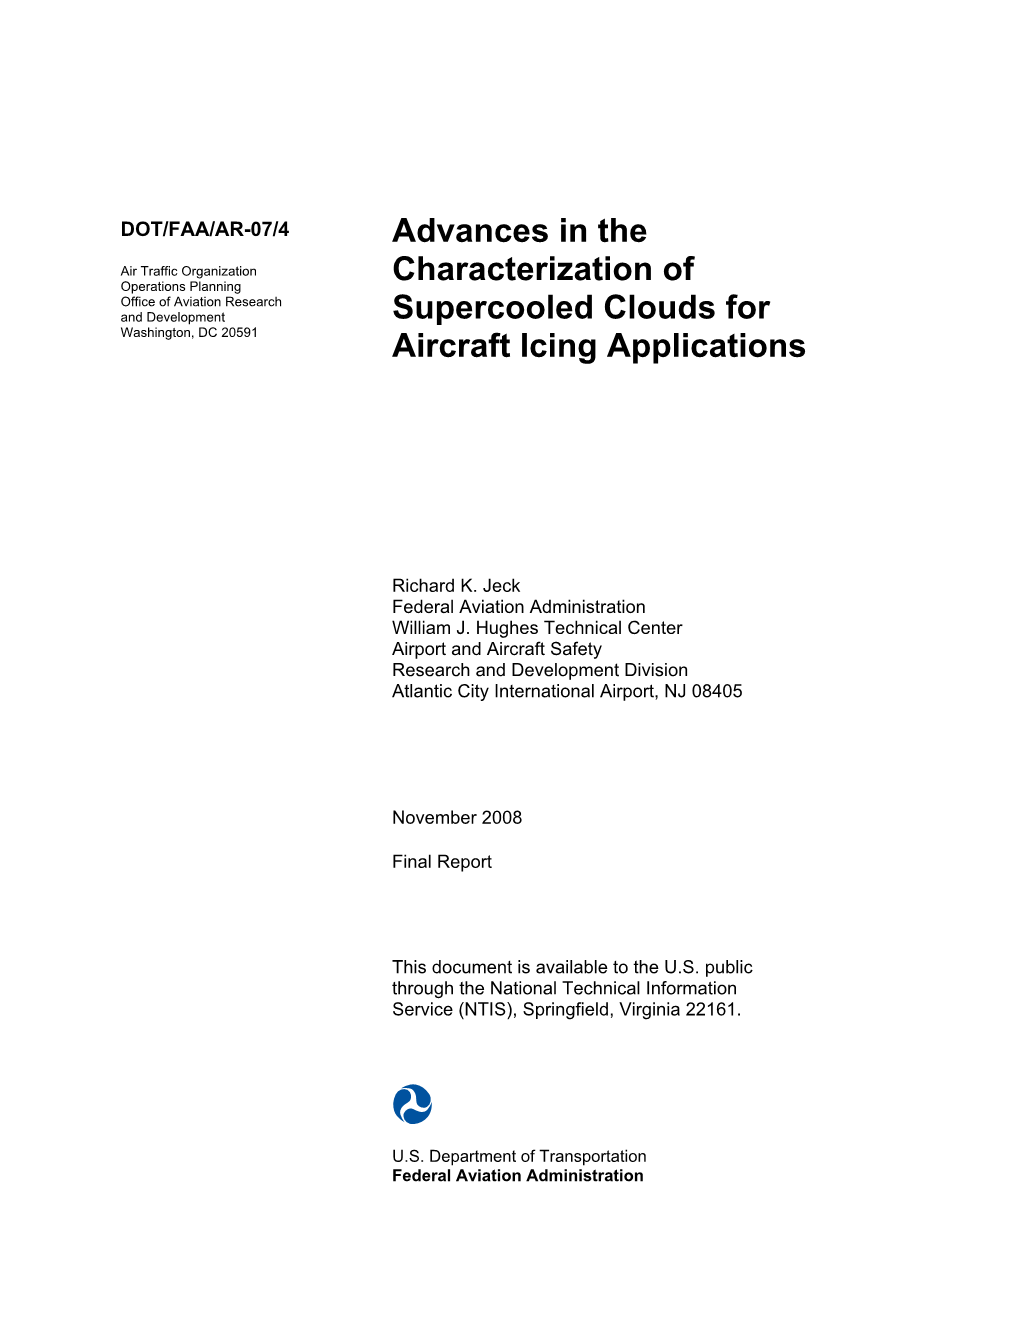 Advances in the Characterization of Supercooled Clouds for Aircraft